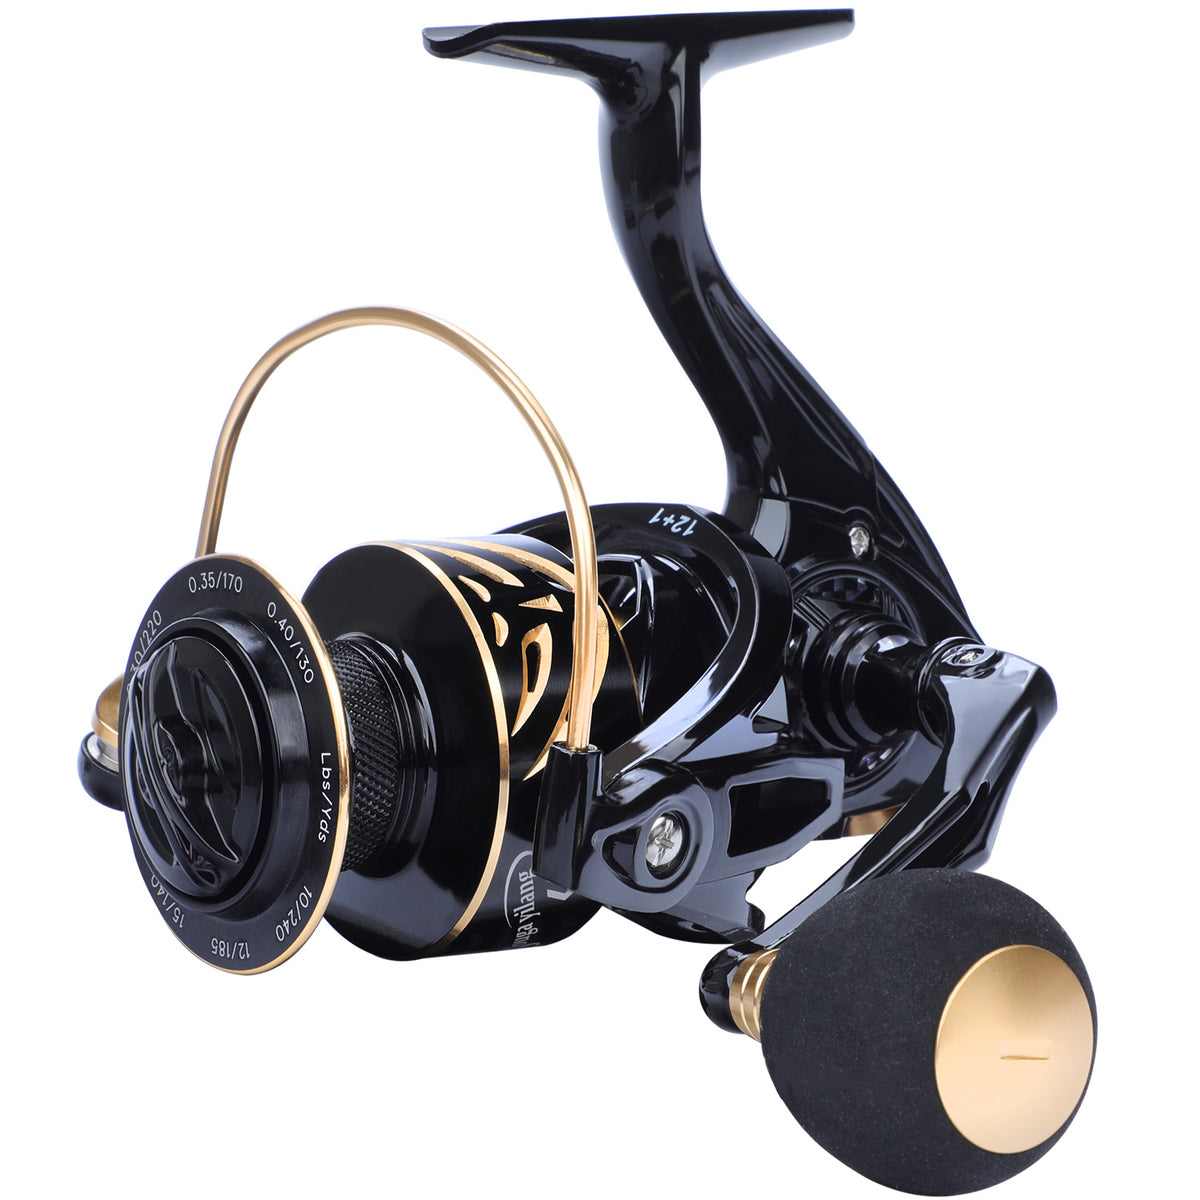 Sougayilang Spinning Reel,12+1 Stainless BB Fishing Reel,Ultra Smooth  Powerful, Lightweight Graphite Frame, CNC Aluminum Spool for Saltwater